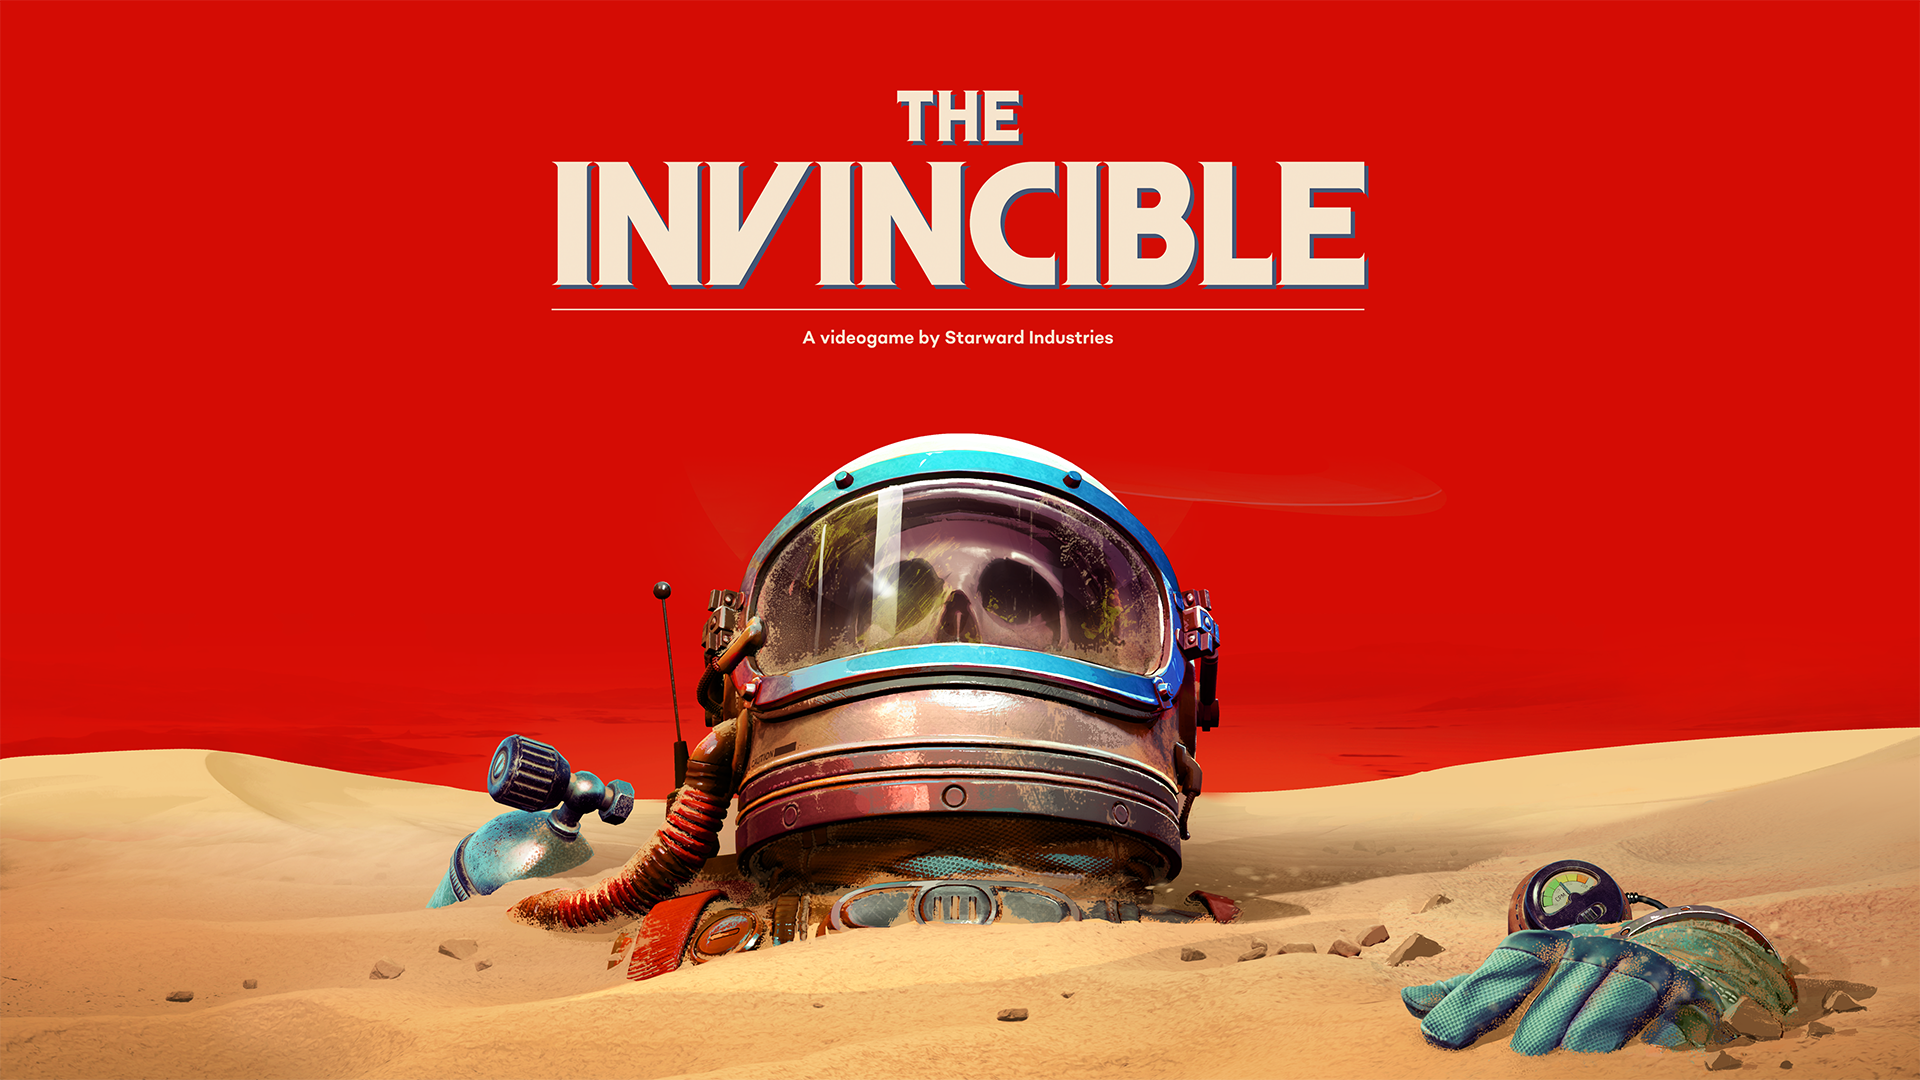 The key art for The Invincible. It features a red sky, sandy ground, and an astronaut's helmet with a skull inside.